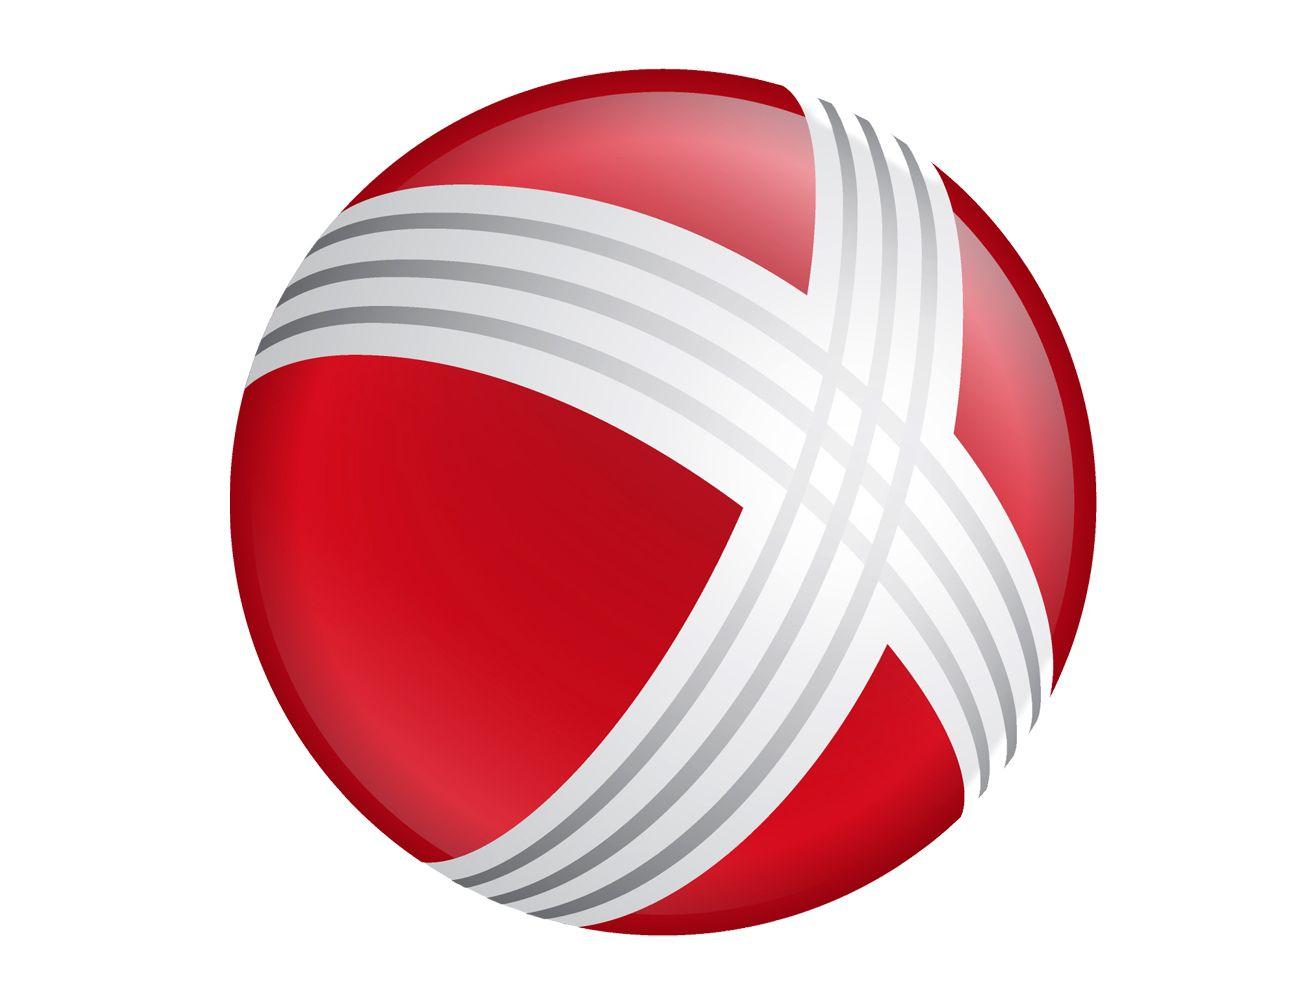 Red Ball White with X Logo - Xerox Logo, Xerox Symbol, Meaning, History and Evolution